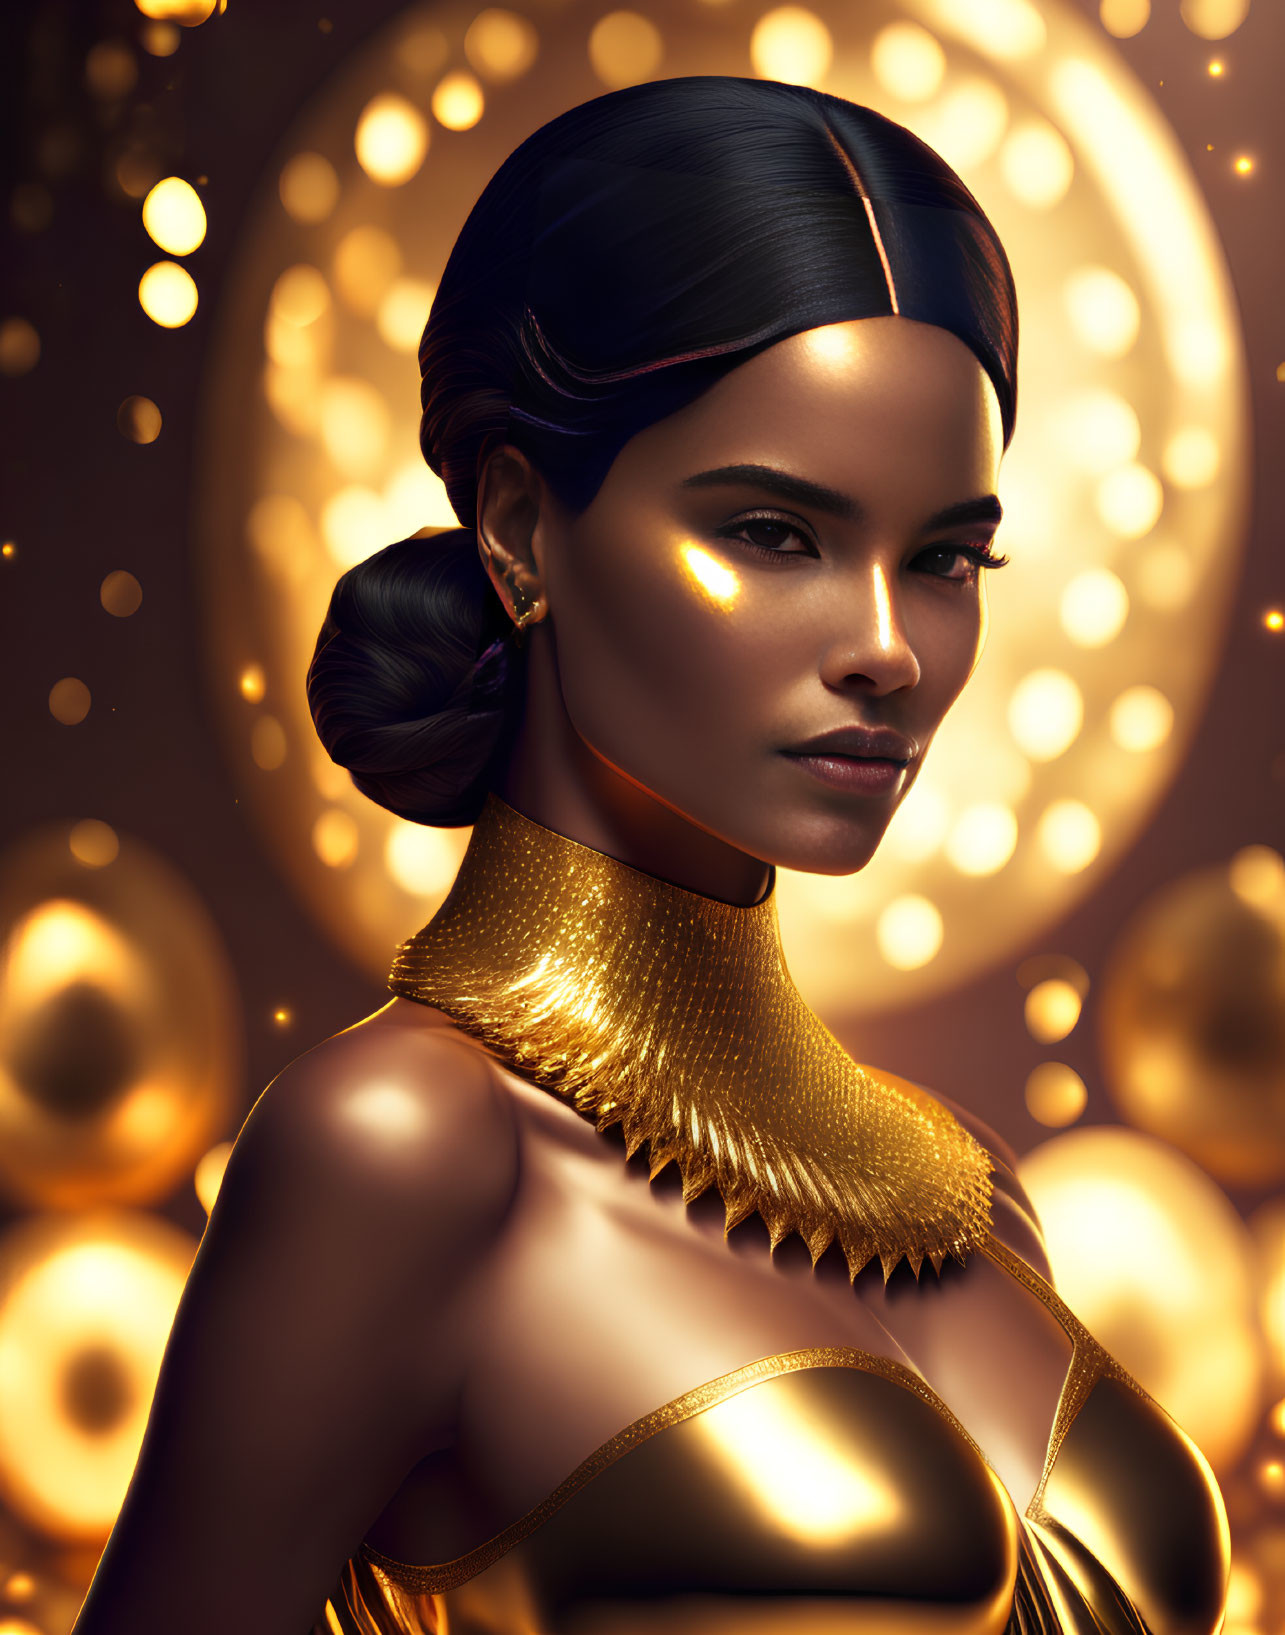 Stylish woman with sleek bun and gold choker in front of golden orbs